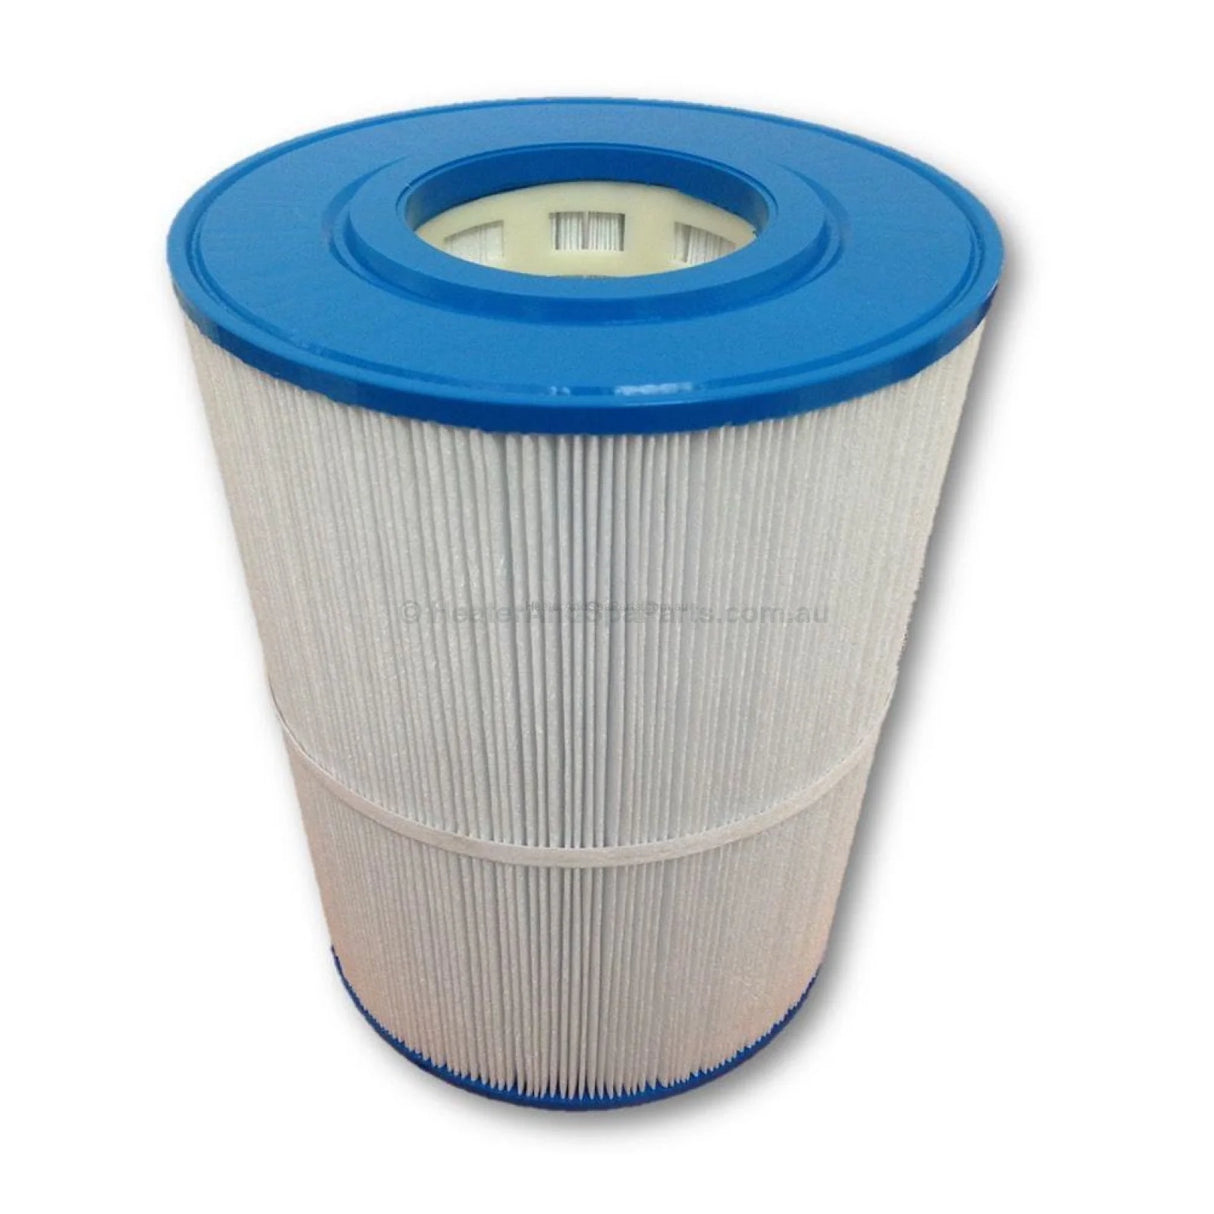 275mm x 230mm Replacement Cartridge Filter - Davey Easy Clear 75 / Crystal Clear / SpaQuip / Questa - Heater and Spa Parts